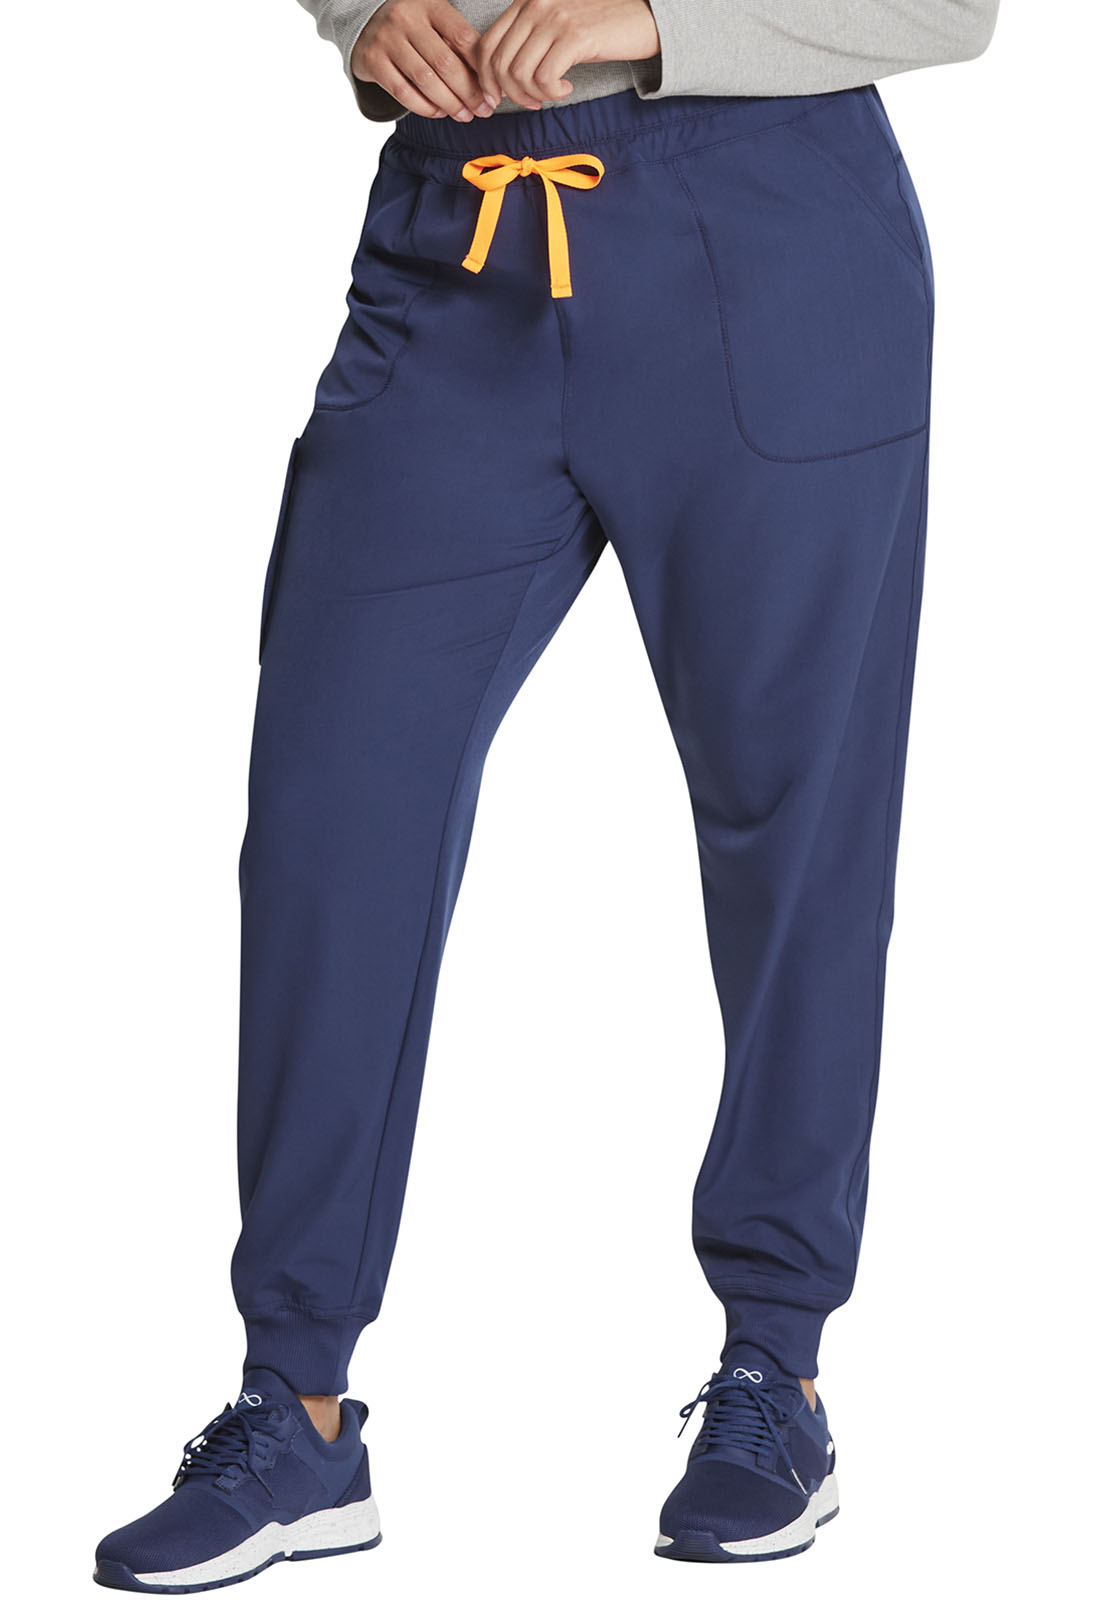 Dickies Dickies Dynamix Mid Rise Jogger in Navy from Dickies Medical